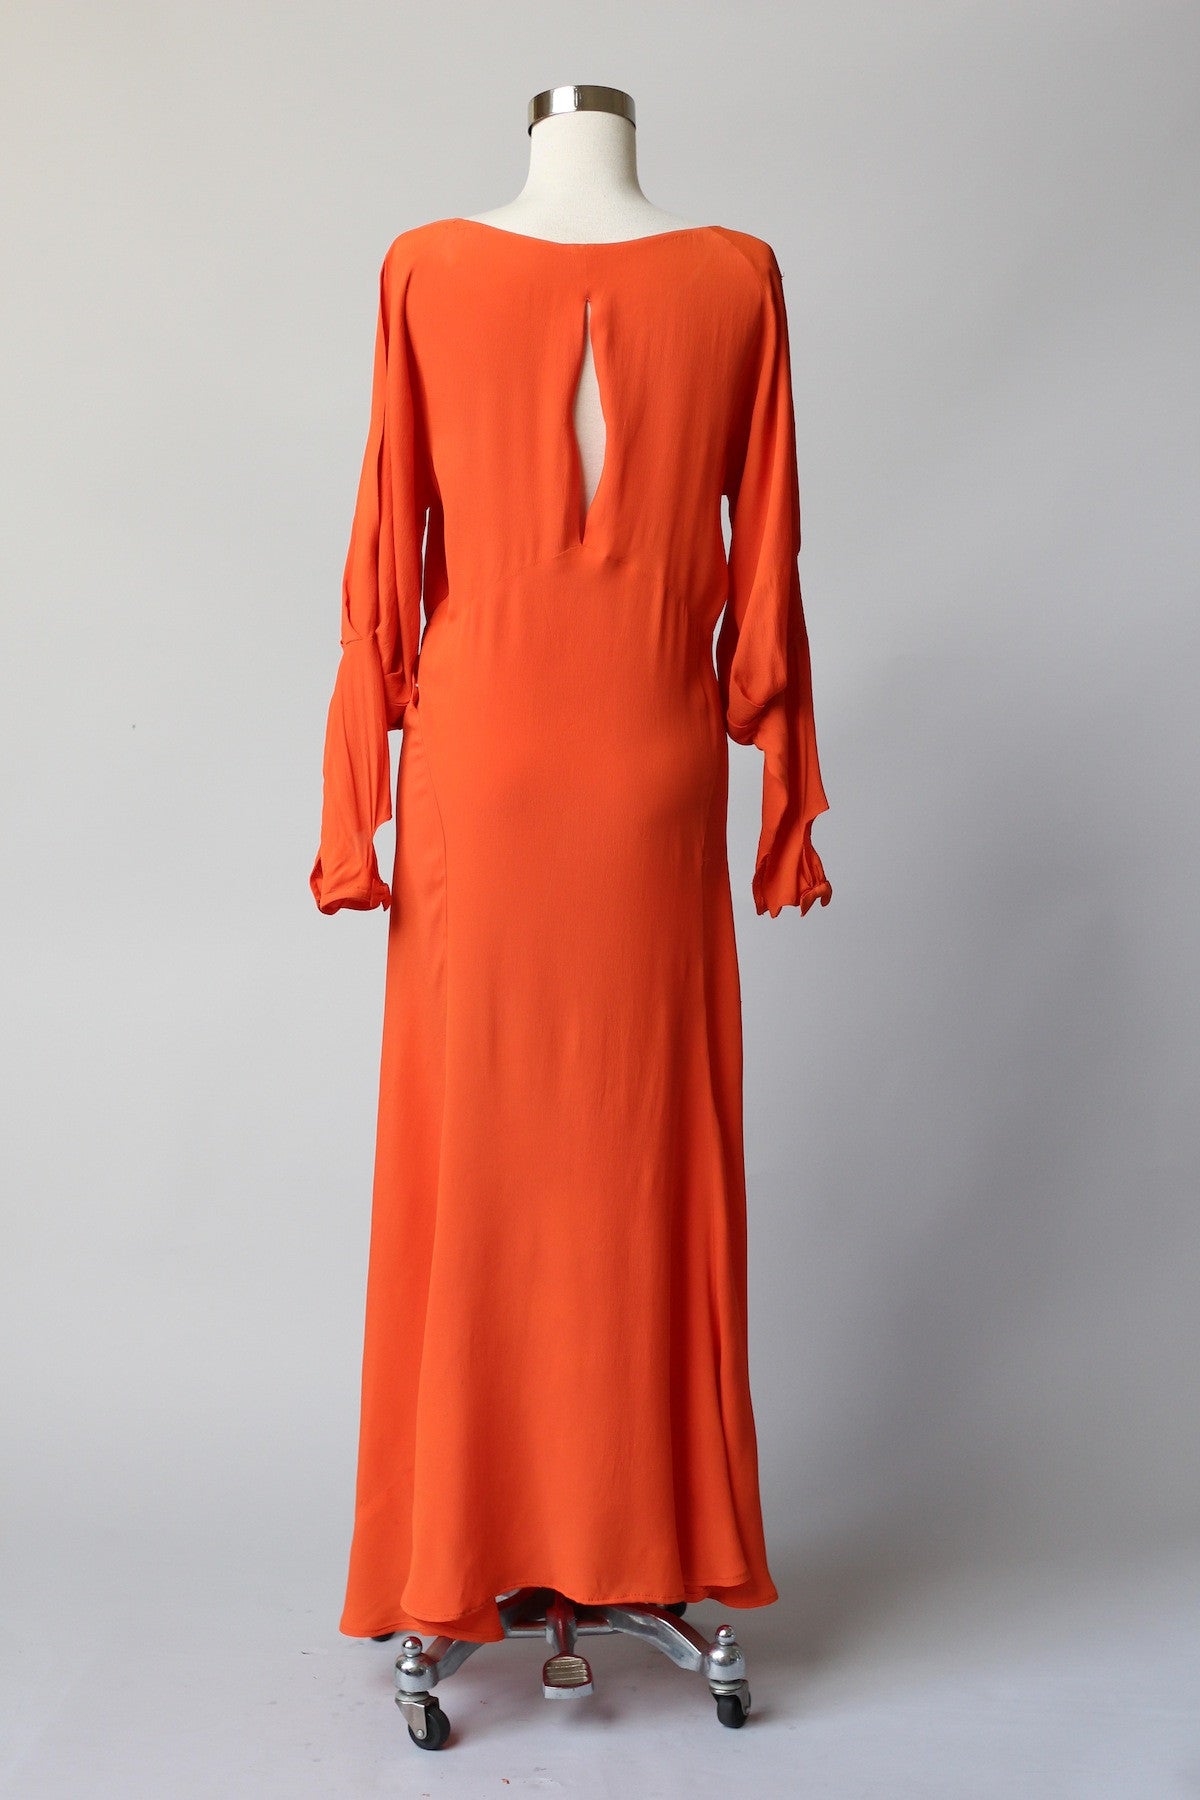 Late 1920s Early 1930s Silk Crepe Orange Gown ~ As Is